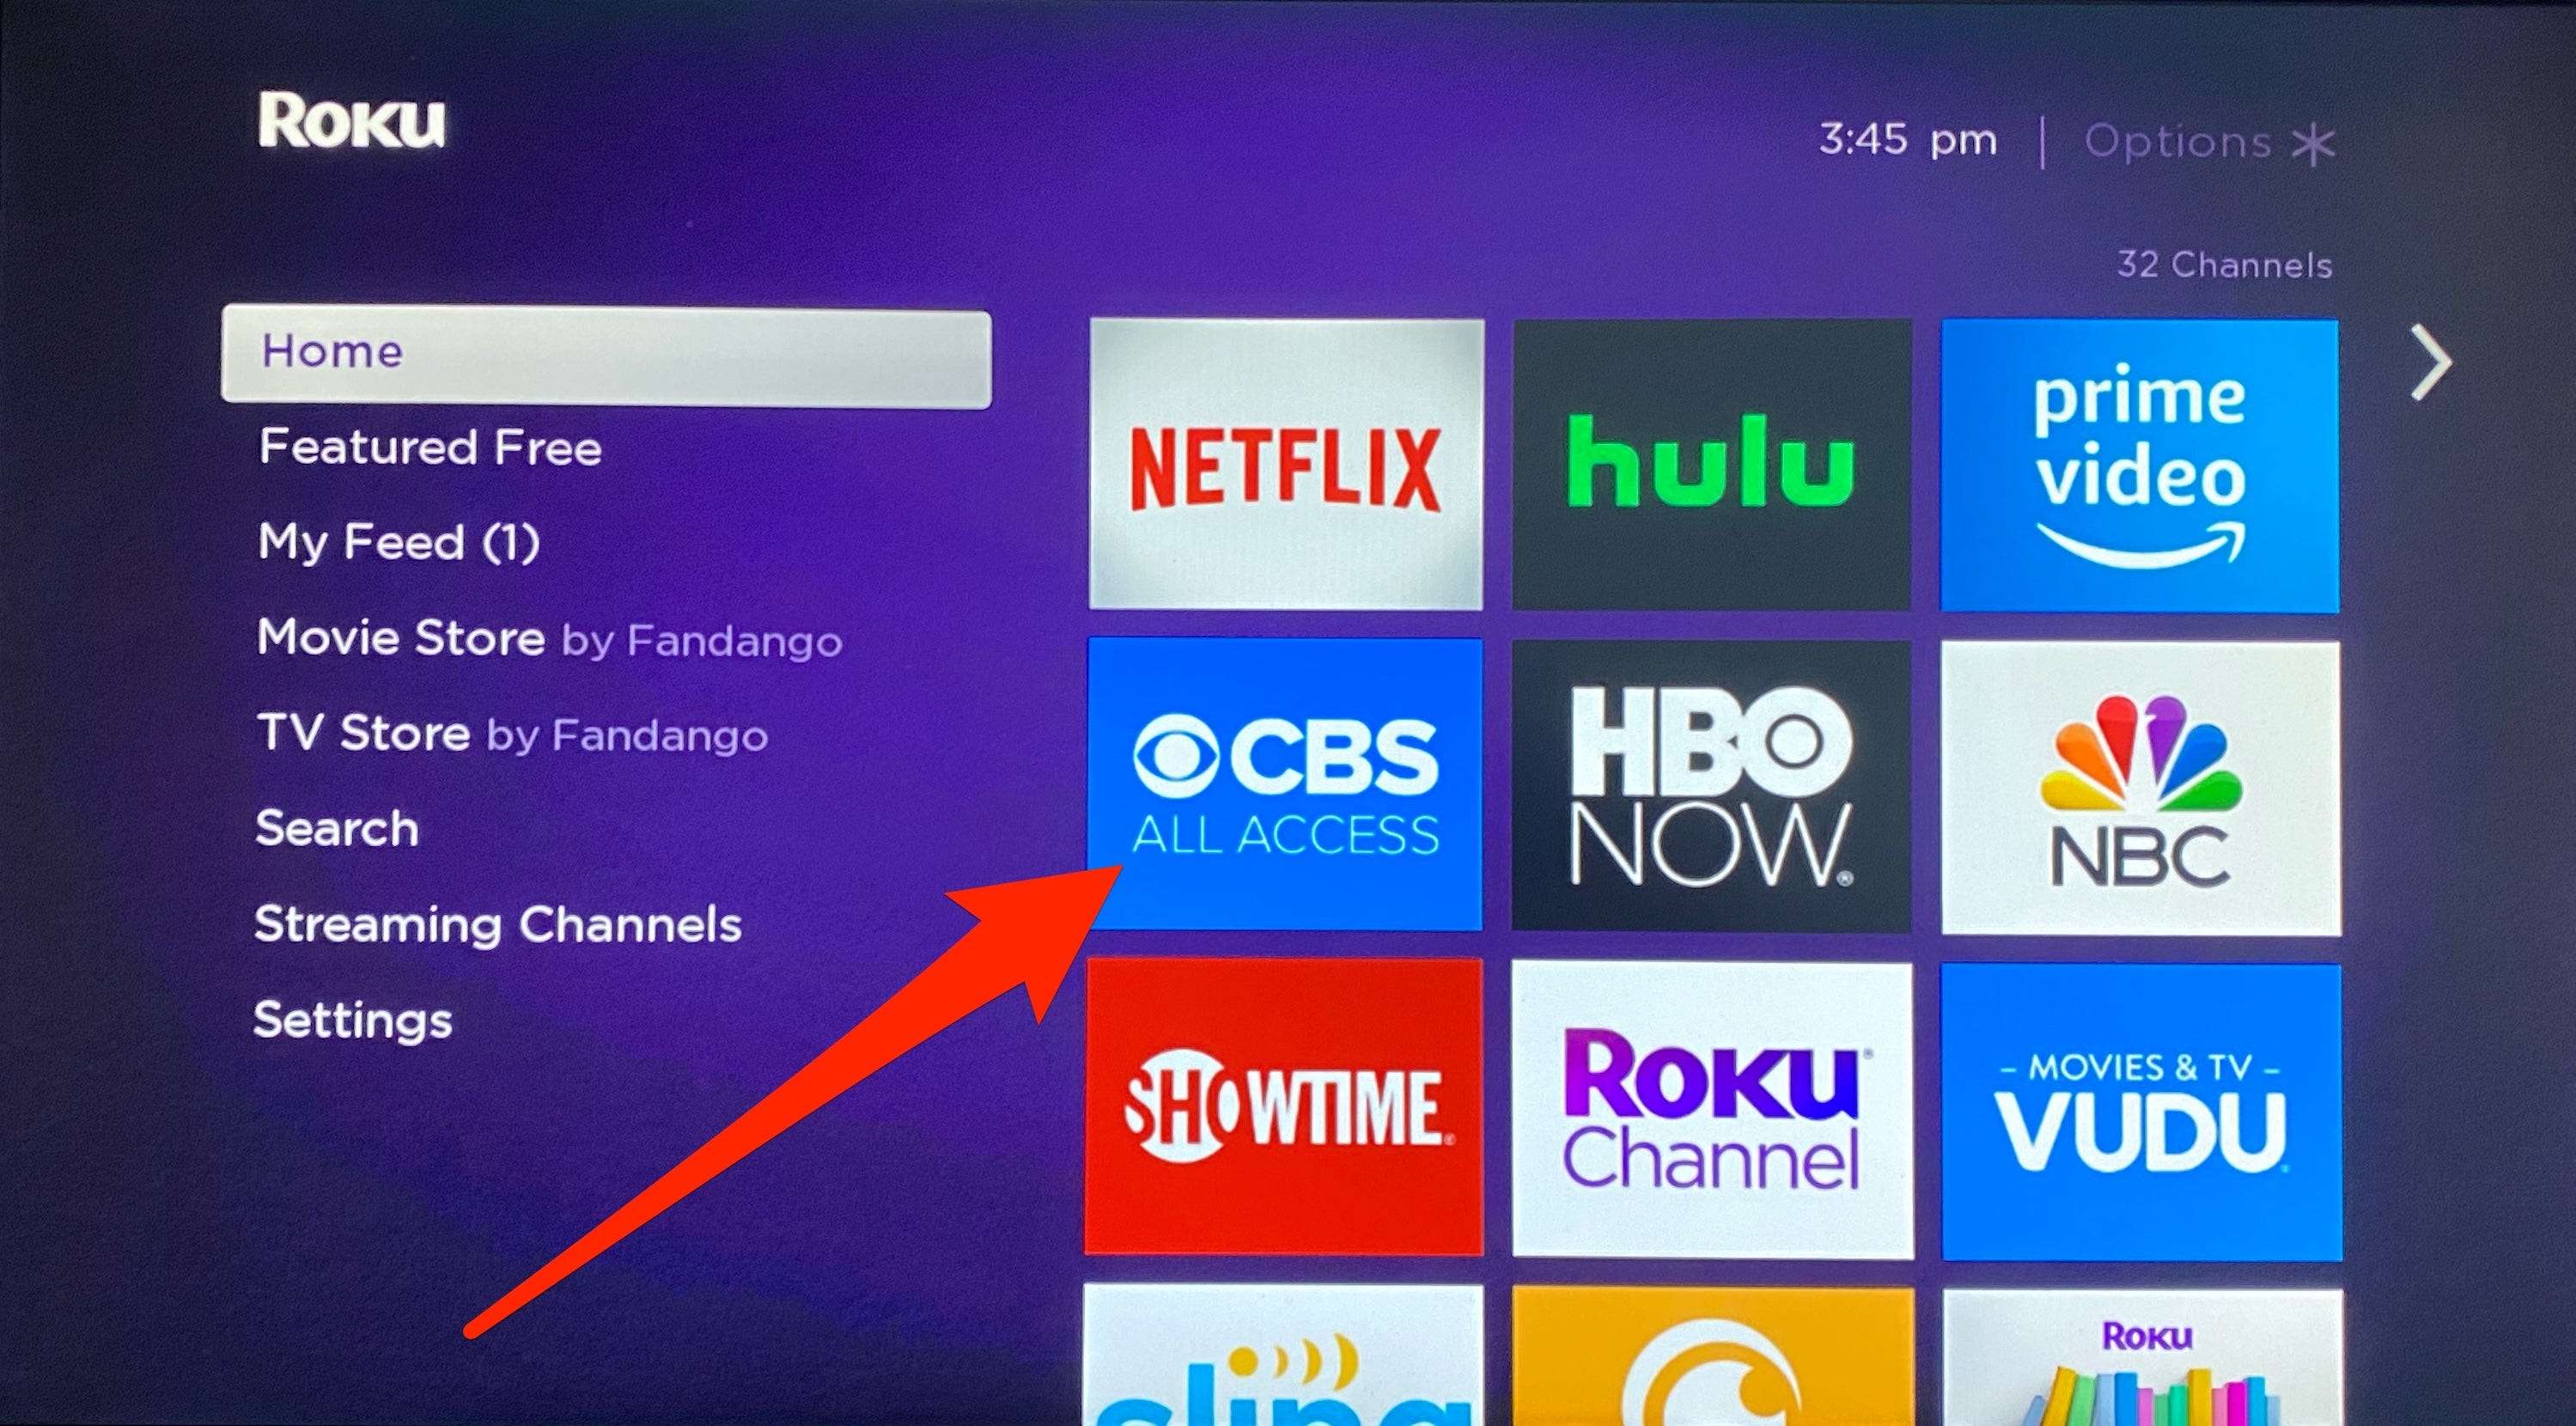 You can watch CBS on Roku, but you'll need to download a CBS or live TV